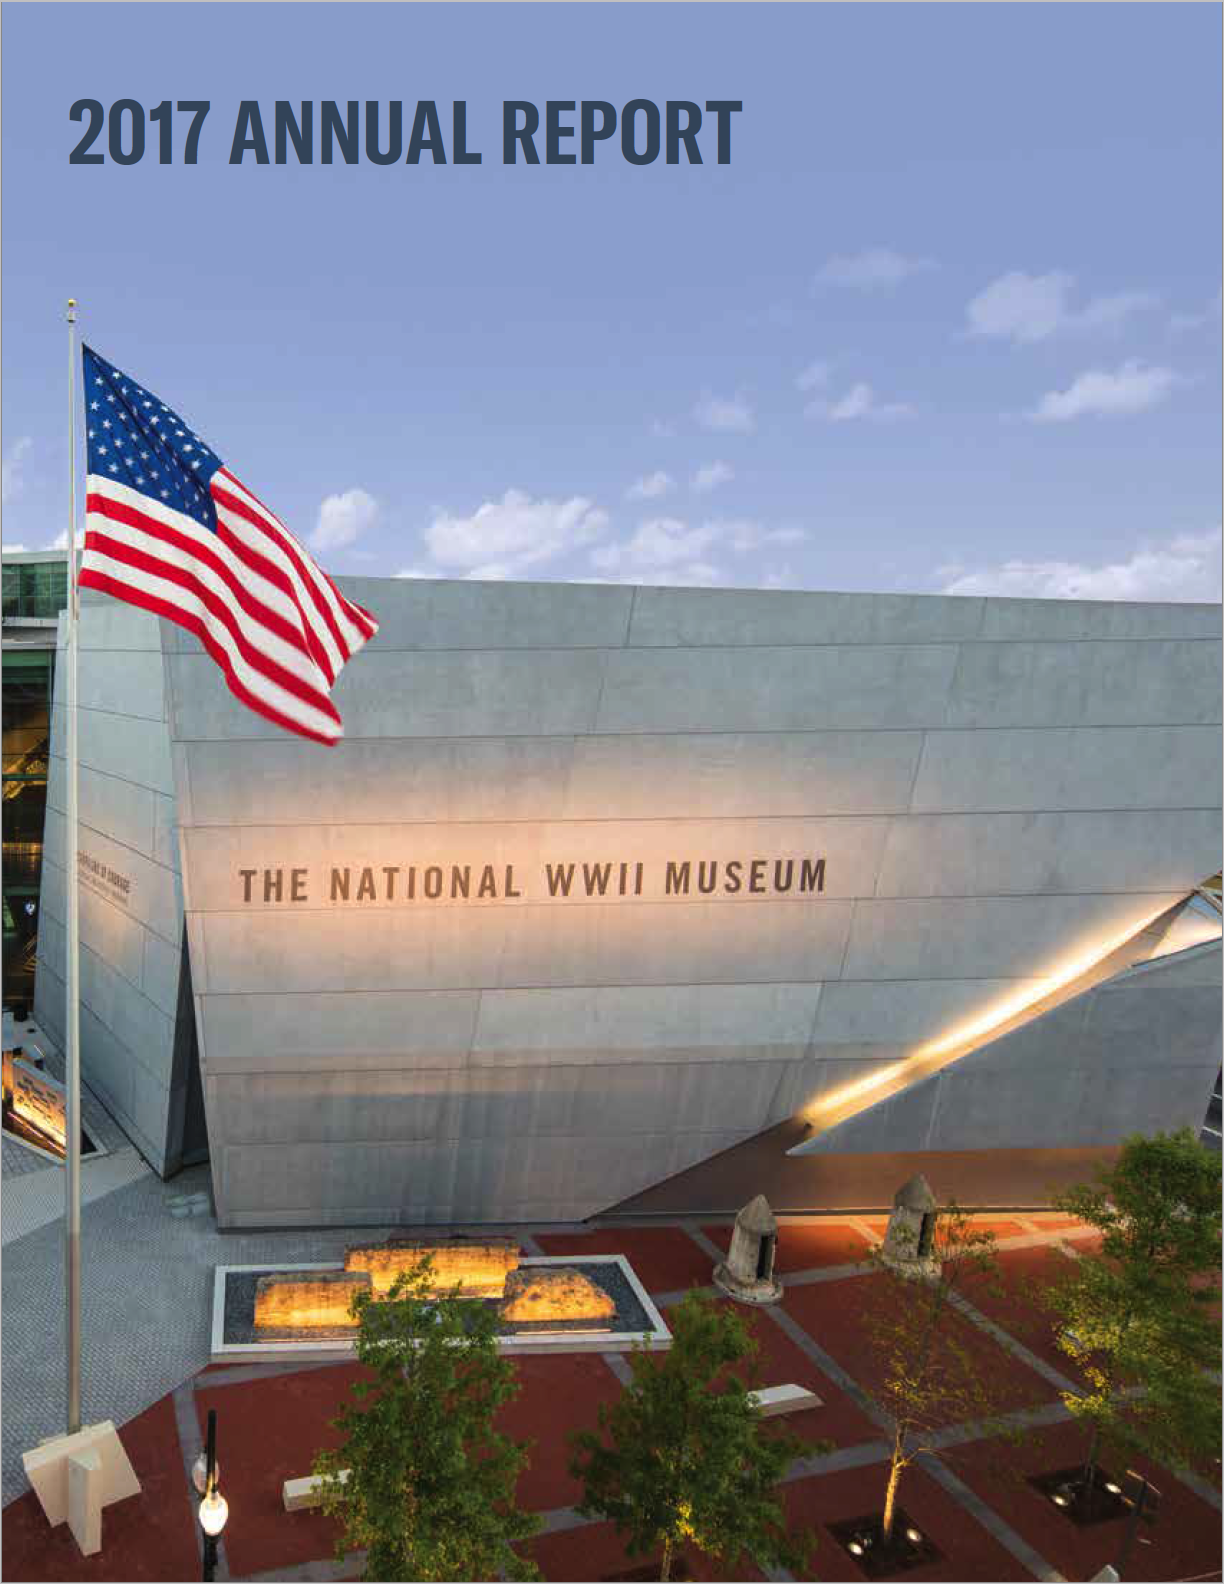 the national wwii museum annual student essay contest